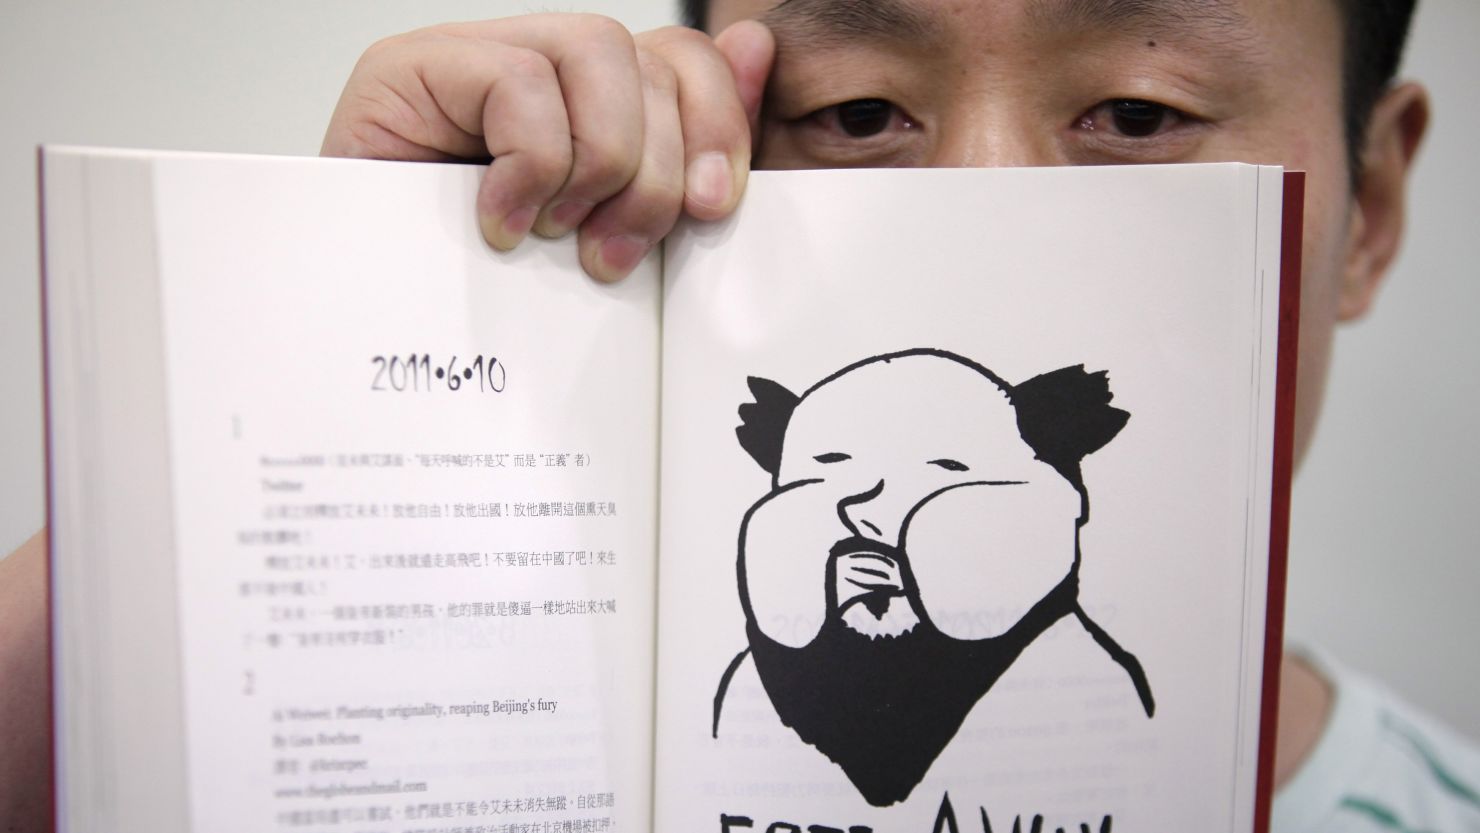 Author Du Bin poses with his book "God Ai," said to be the first biography of dissident artist Ai Weiwei.